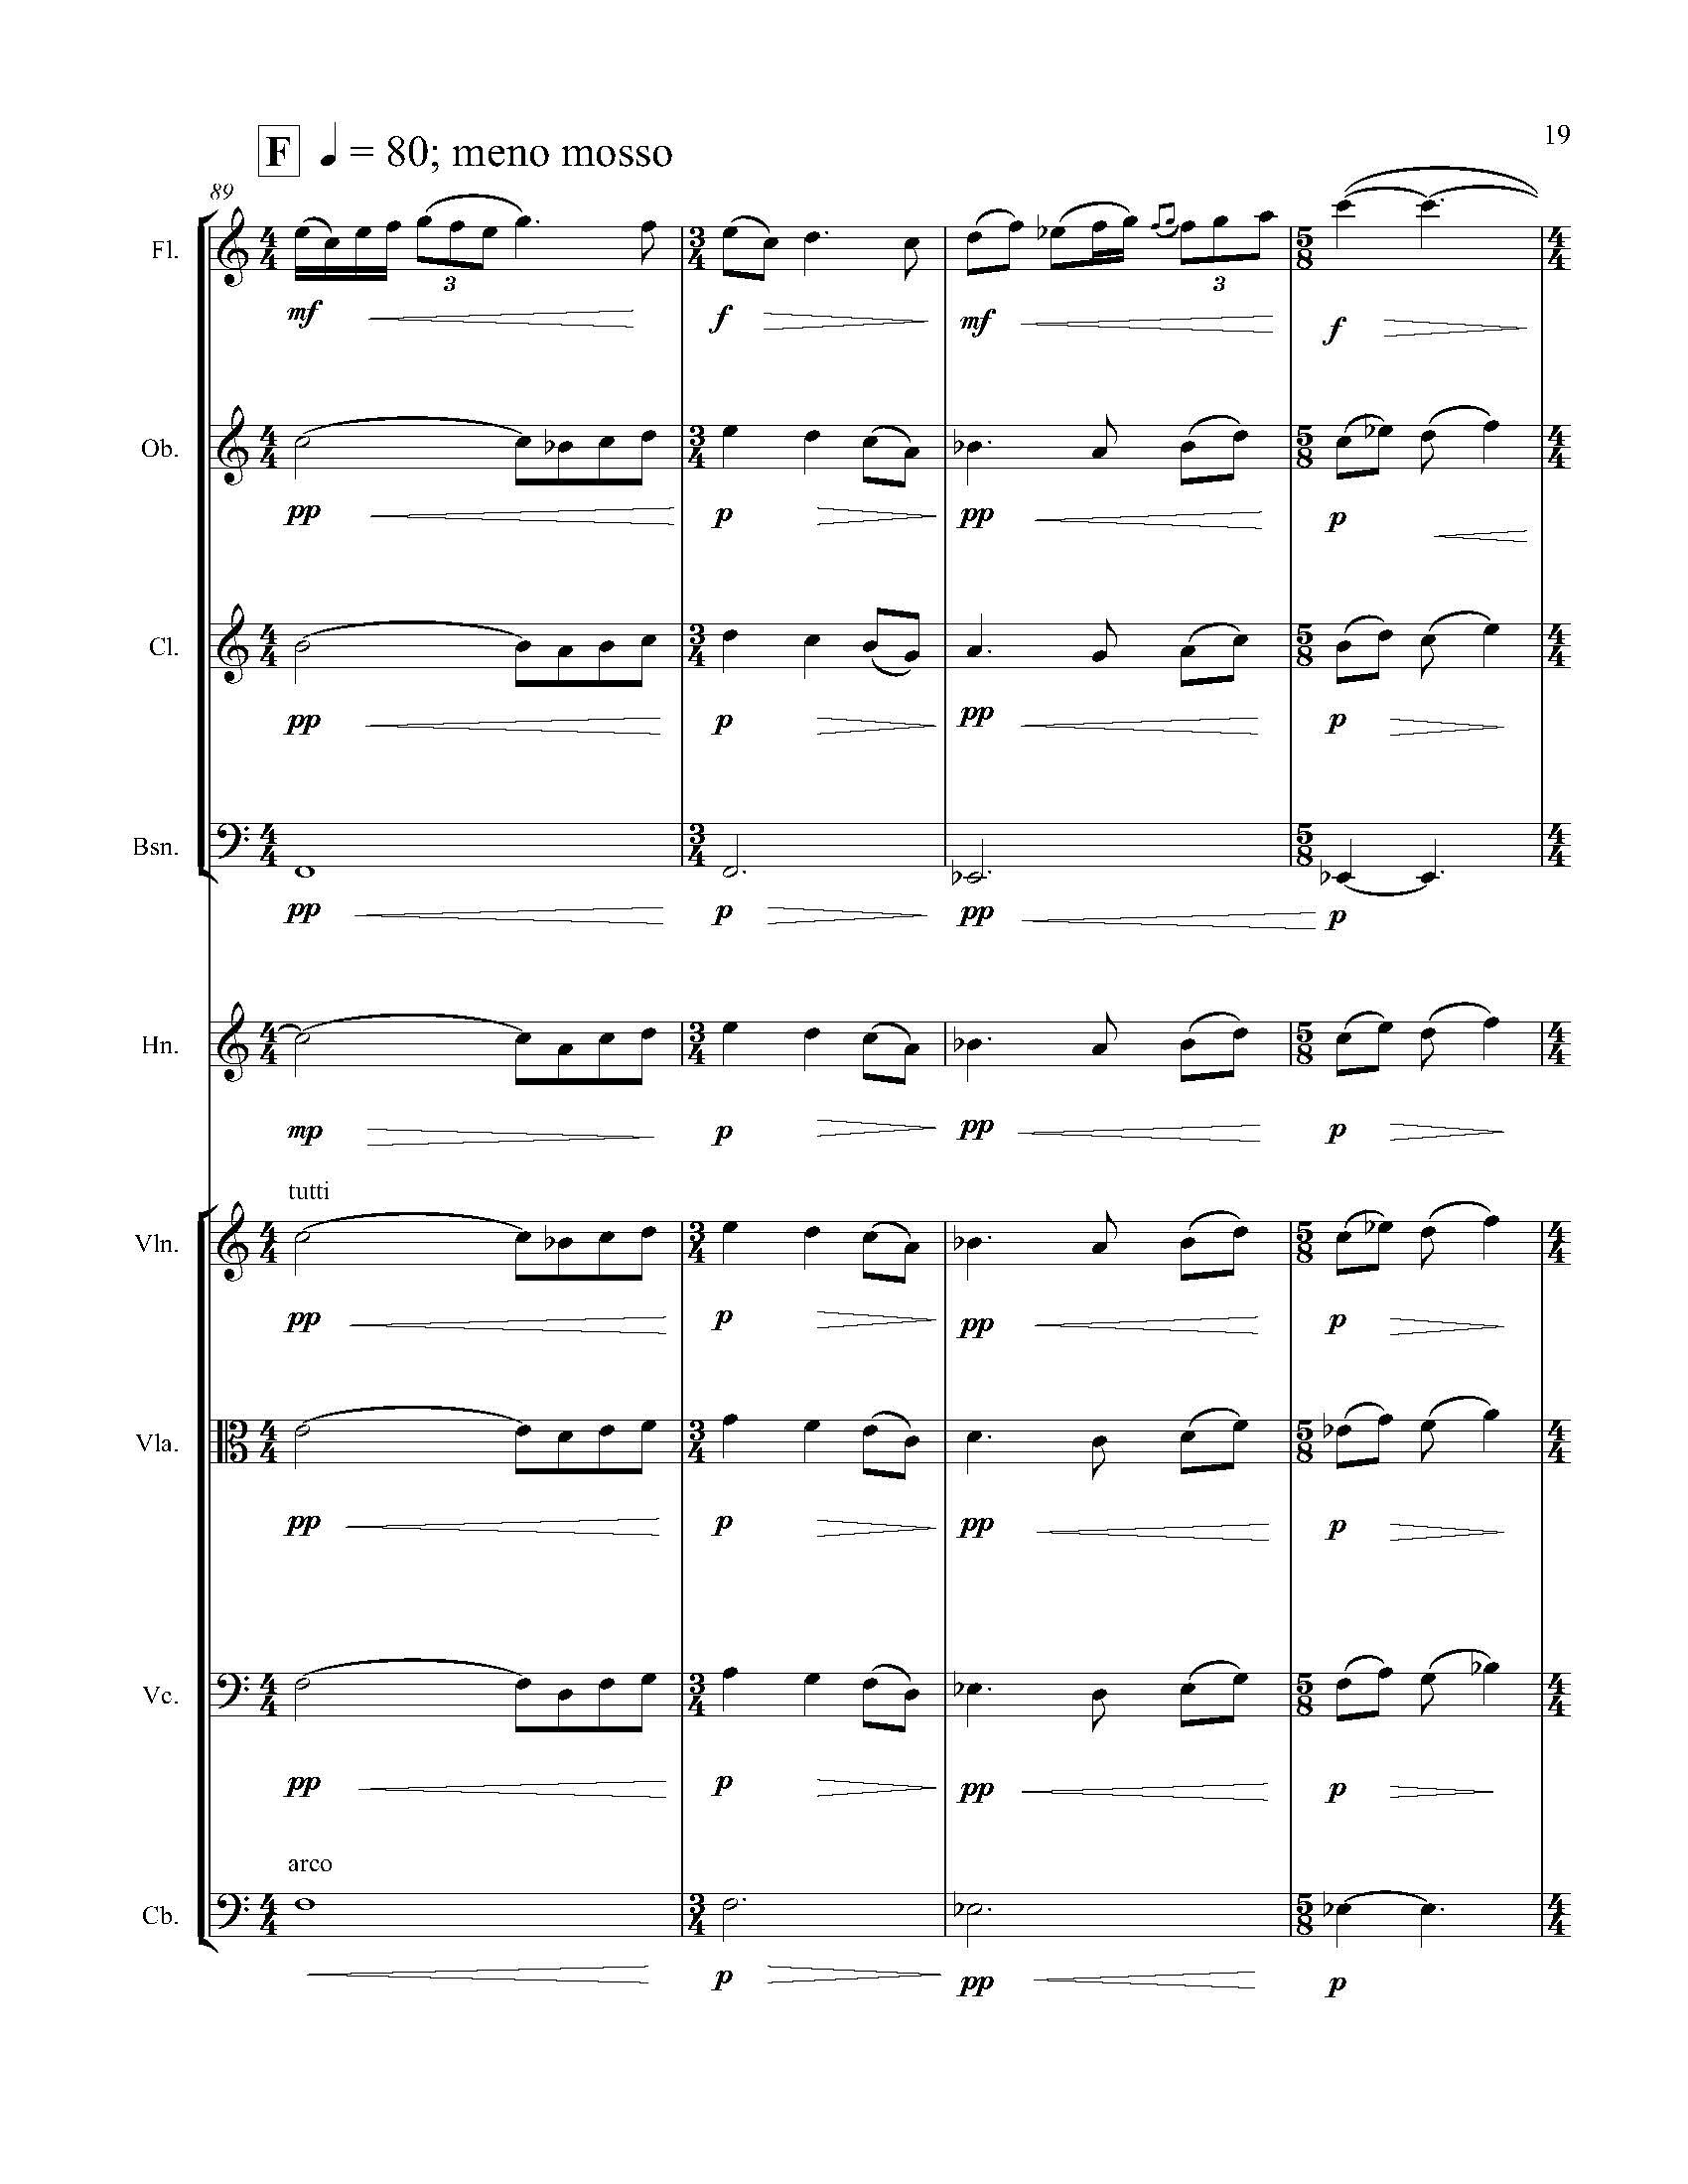 In Search of a Bird - Complete Score_Page_25.jpg